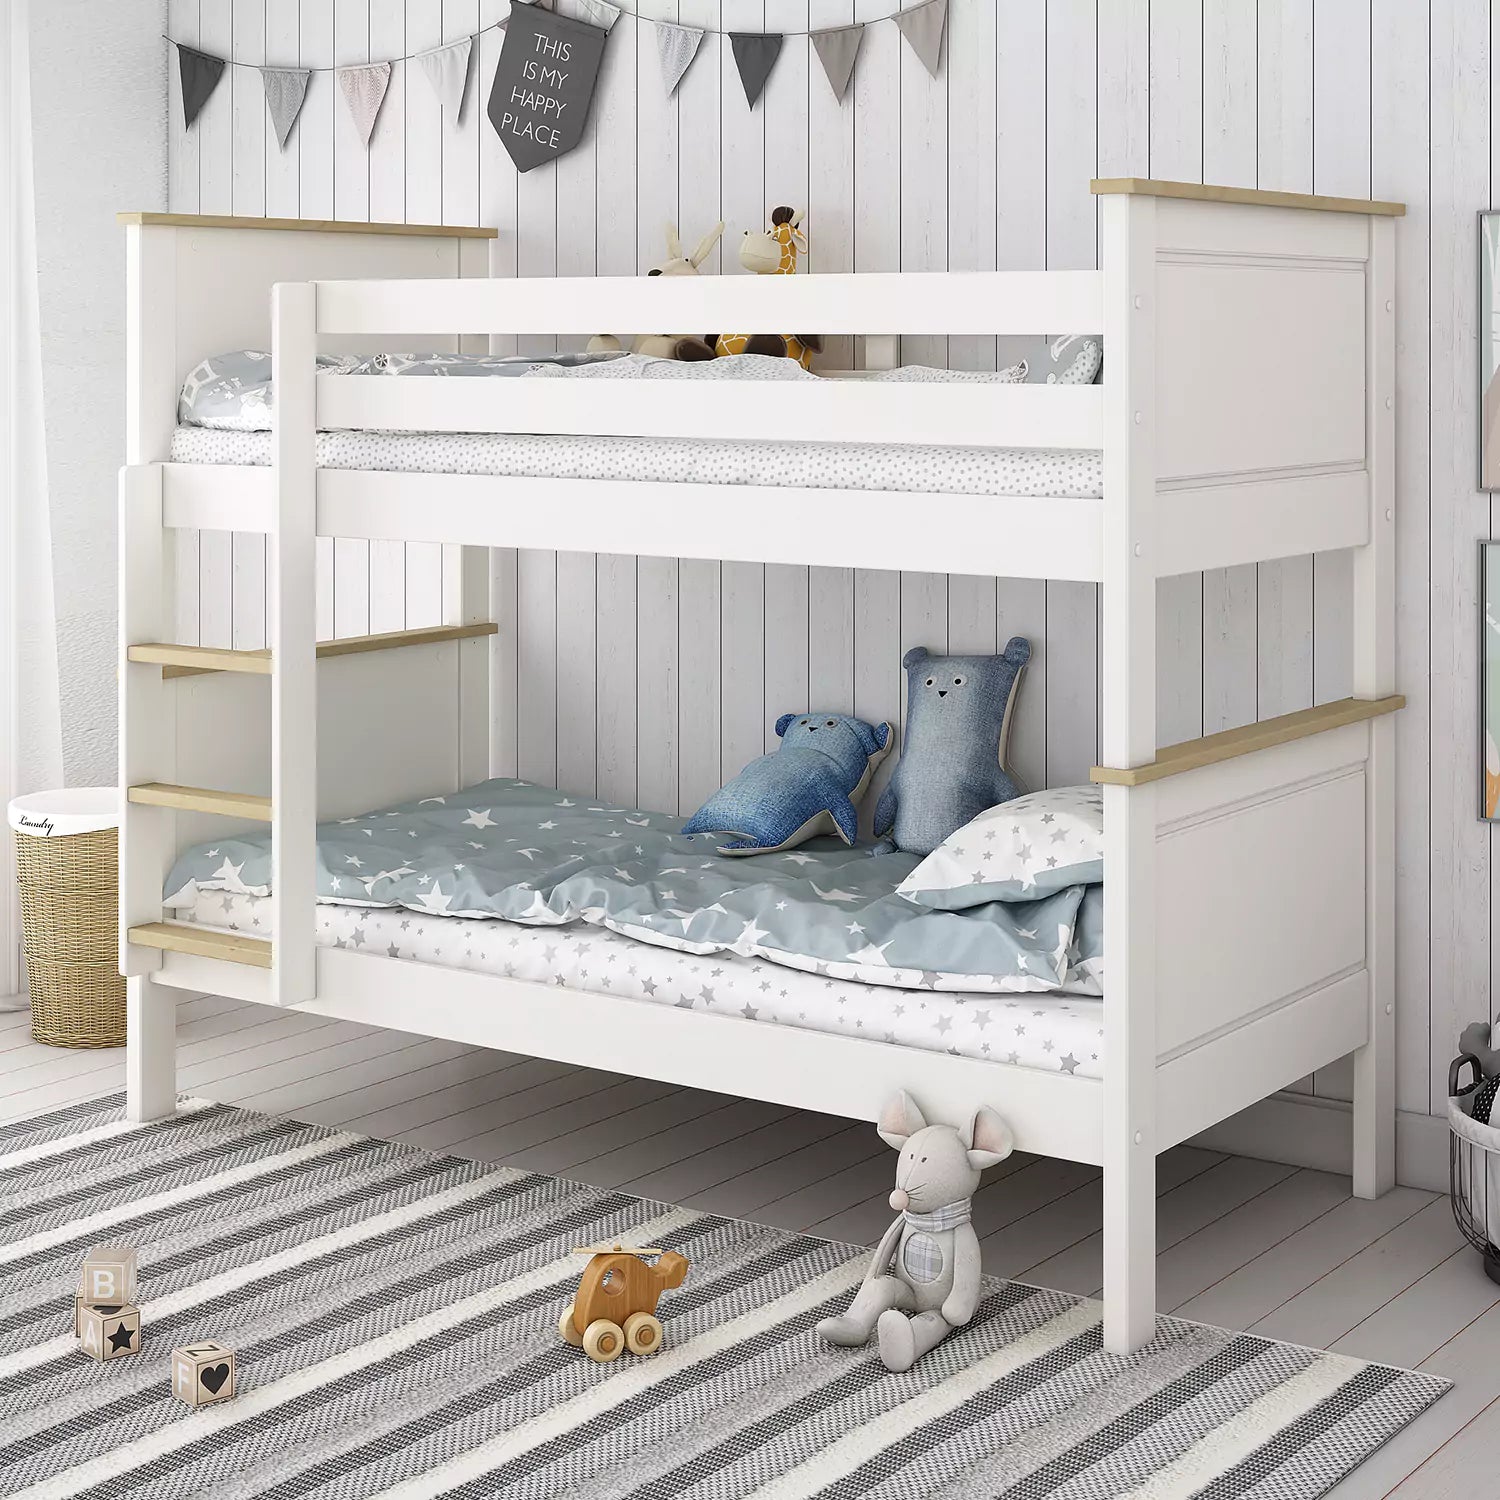 An image of Heritage Trundle Bunk Bed for Kids - White & Oak